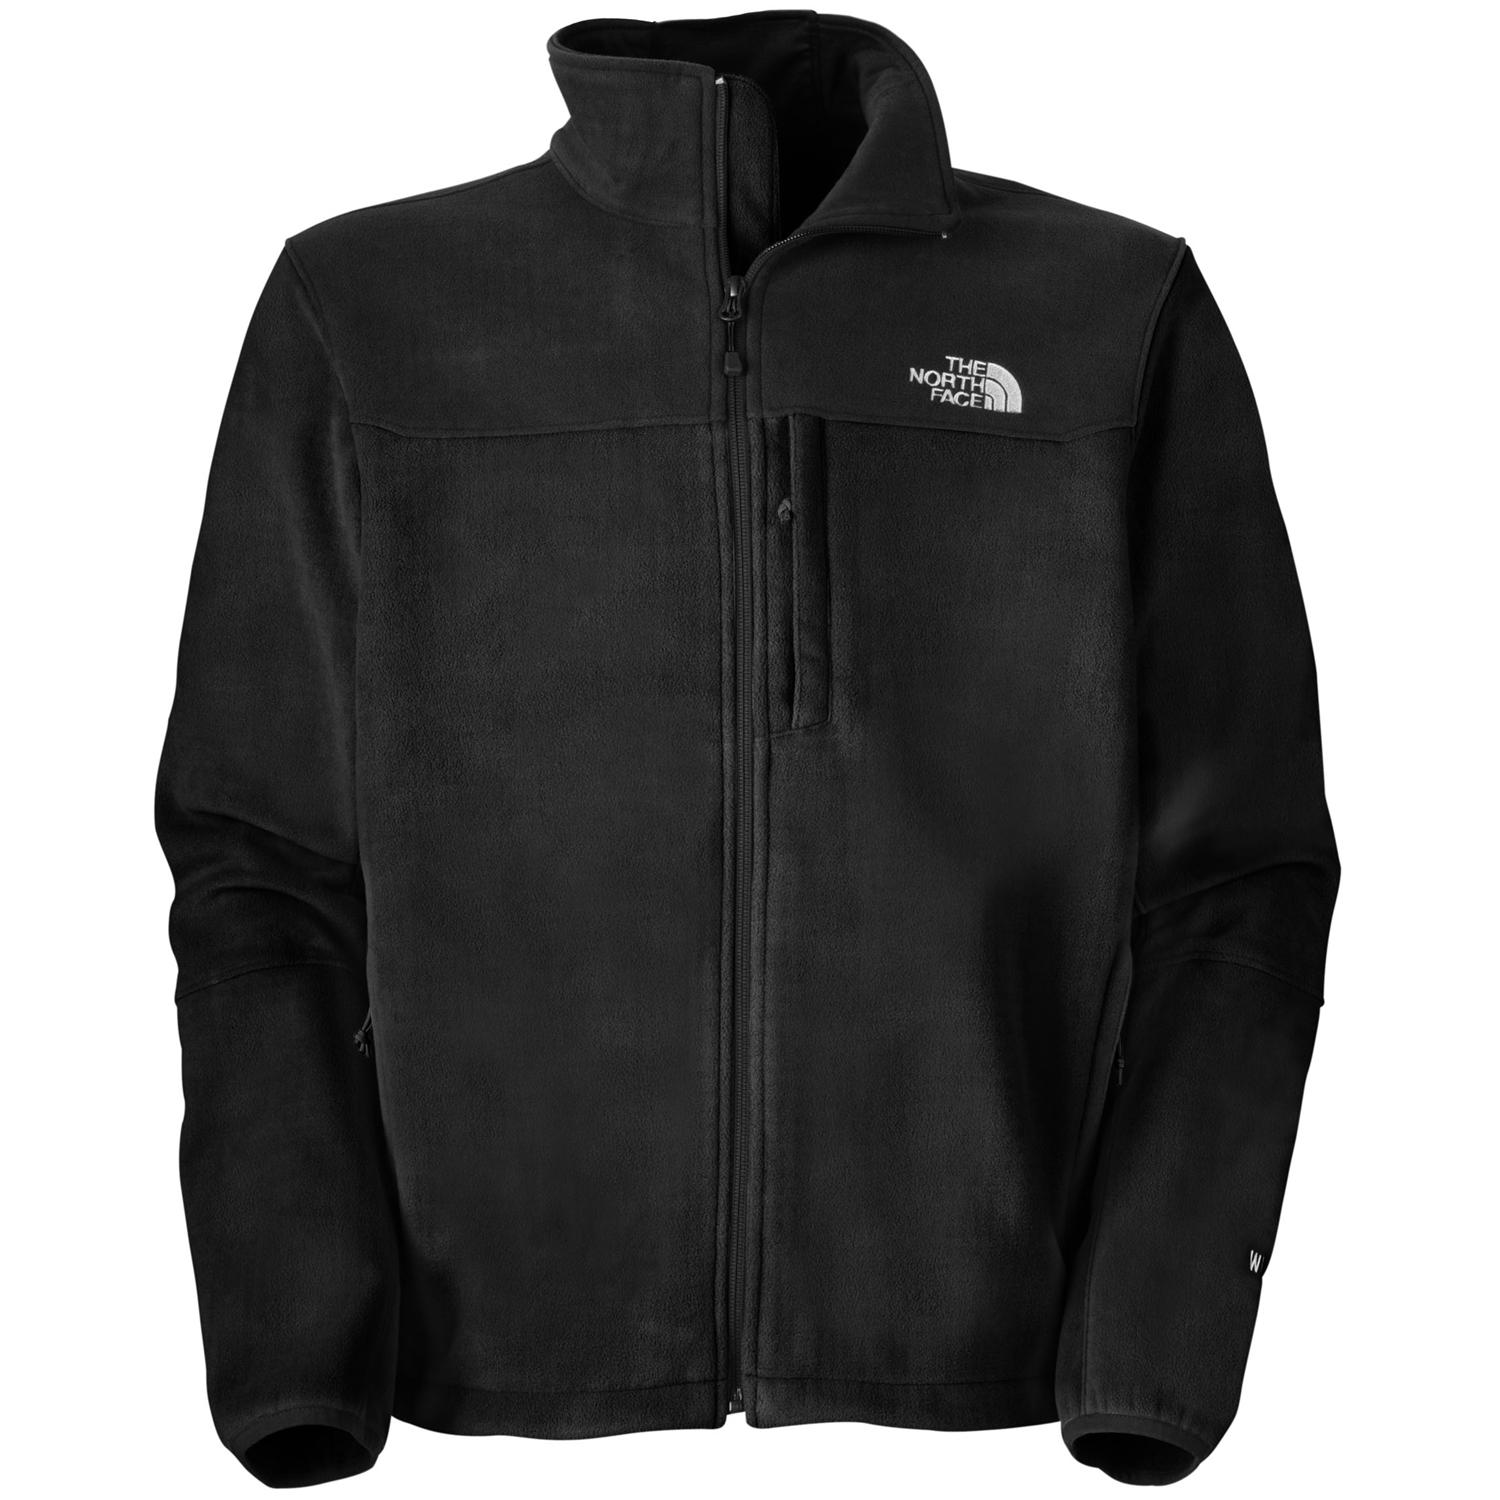 The North Face Windwall 2 Jacket | evo outlet